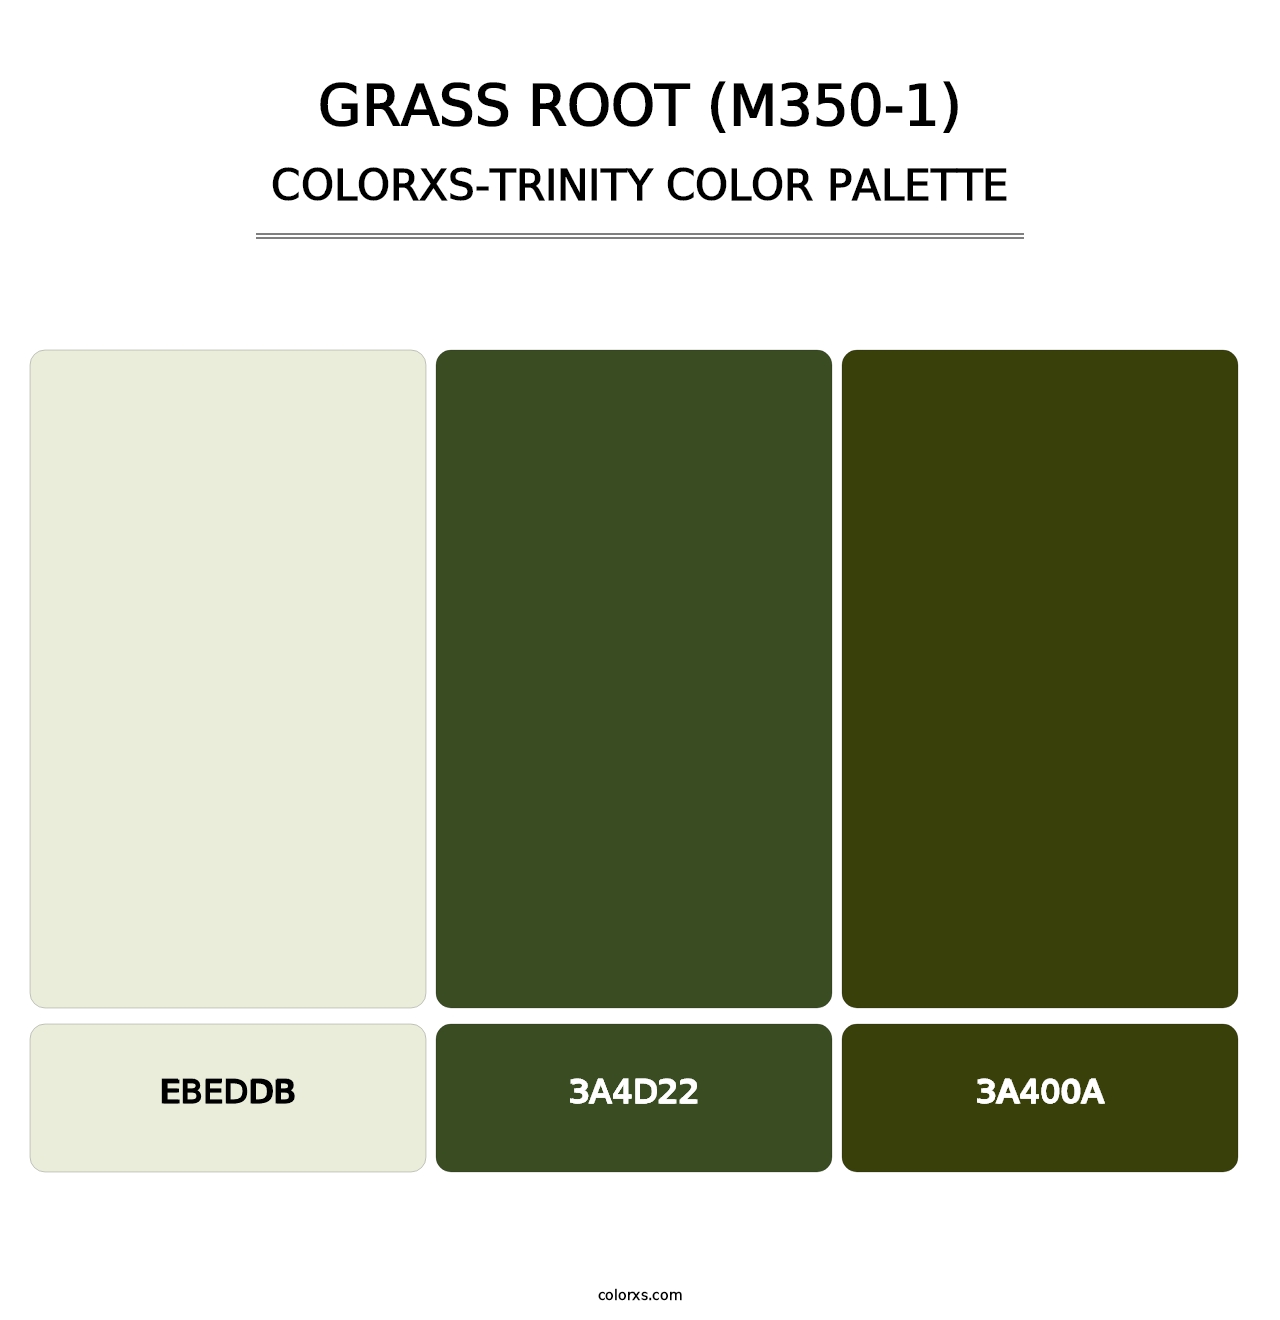 Grass Root (M350-1) - Colorxs Trinity Palette